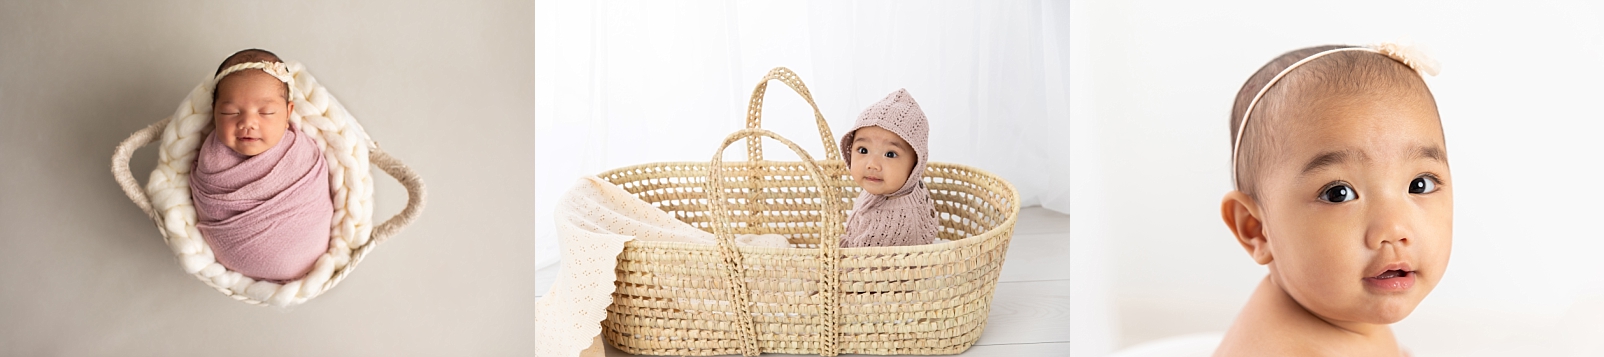 First Year Membership Photos with Maryland Baby Photographer of a newborn in a basket, 7 month old in a basket, and a face close-up of a 1 year old
